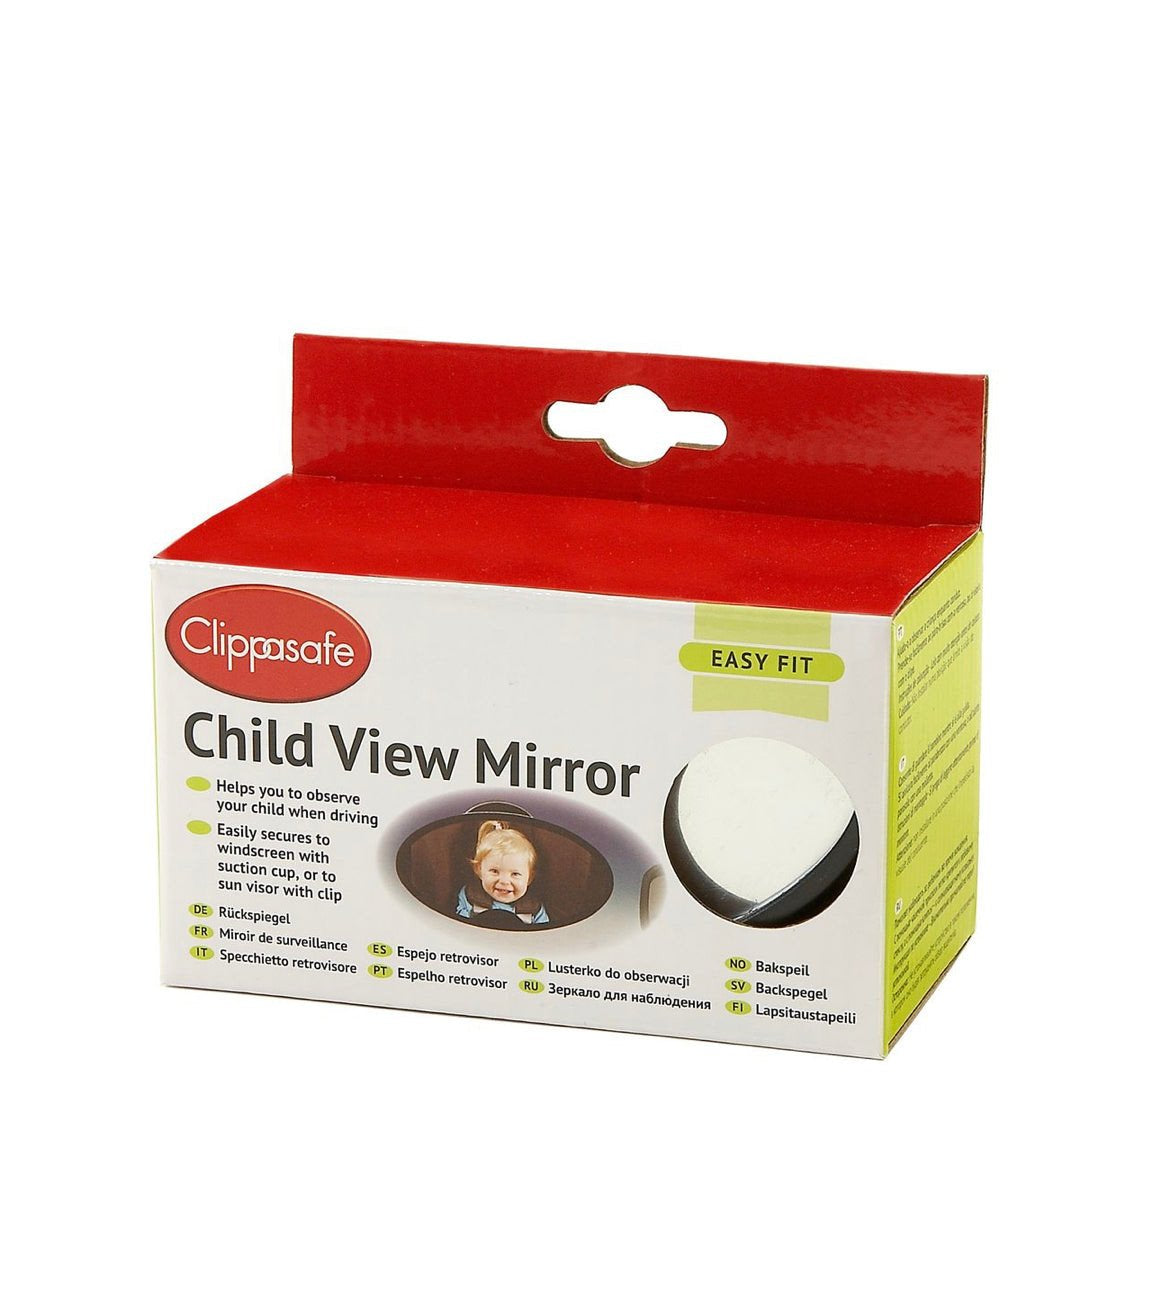 Child View Mirror by Clippasafe.